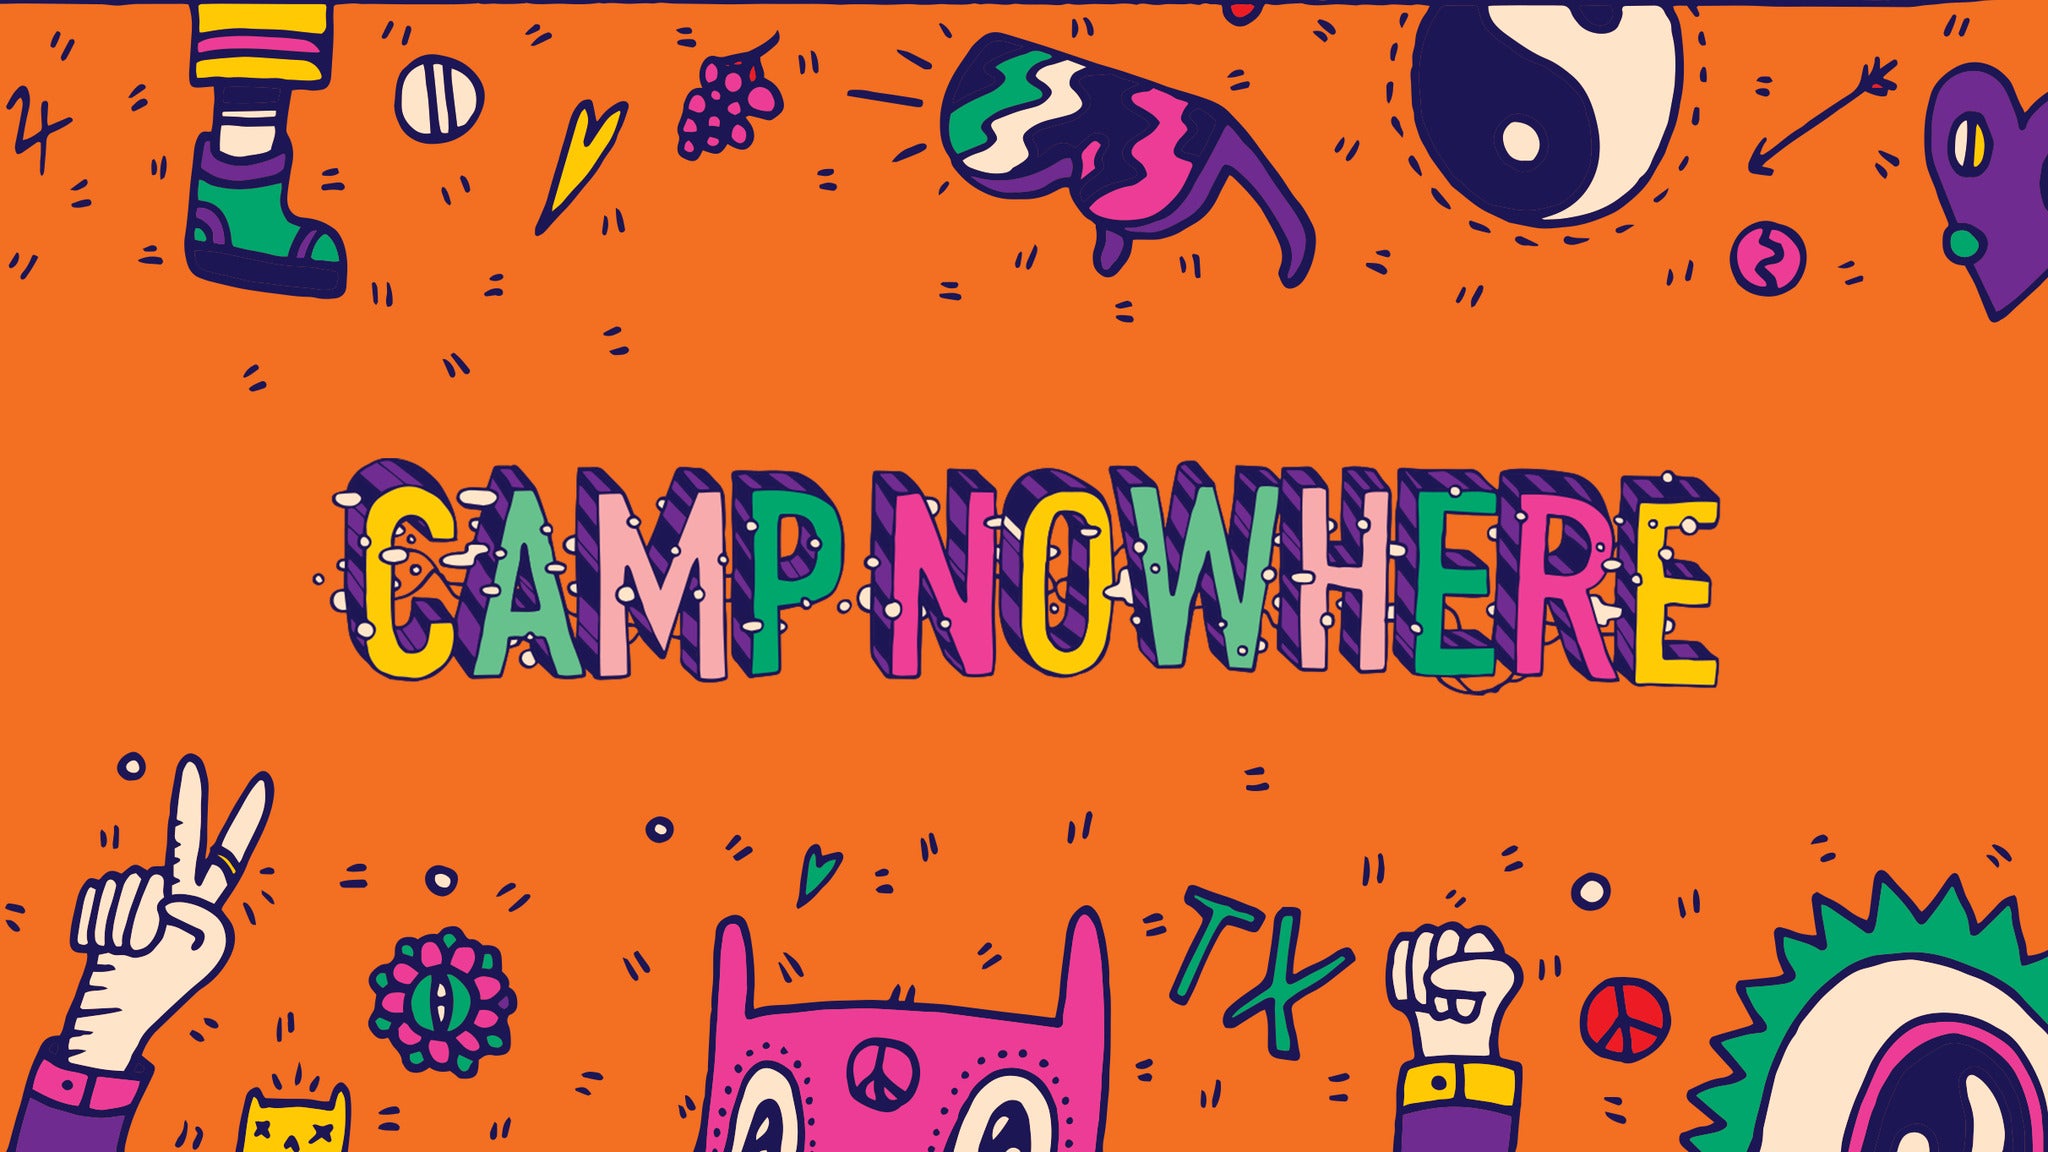 Camp Nowhere 2020 in Dallas promo photo for Live Nation / Local presale offer code